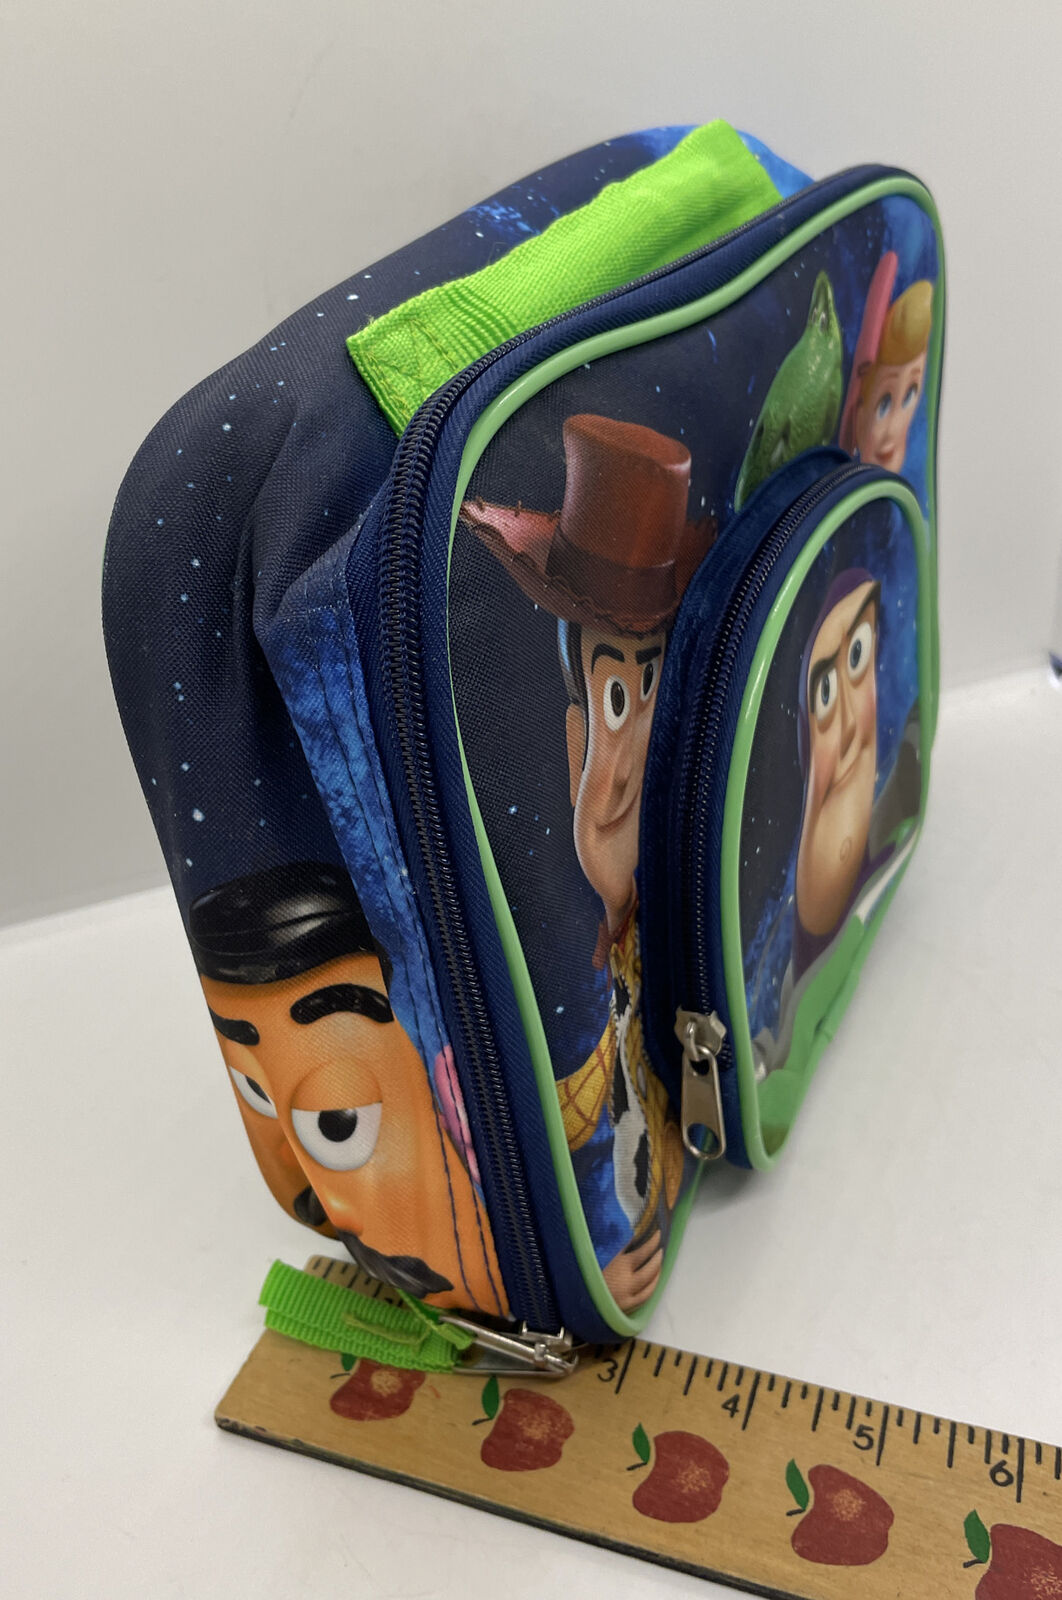 Disney Toy Story 4 Boy's Girl's Soft Insulated School Lunch Box (One size, Blue)